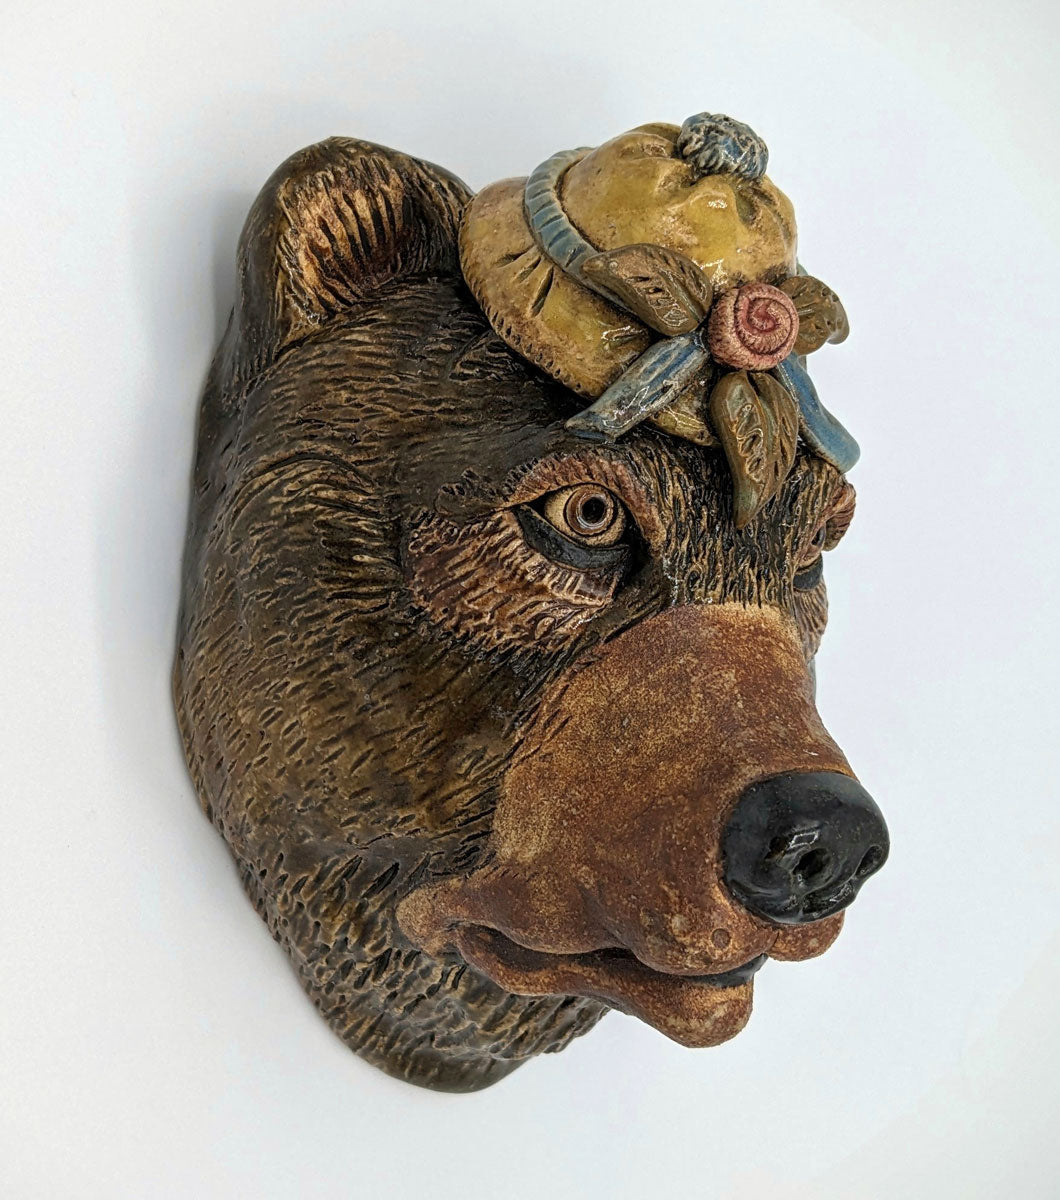 25. Bear with Hat